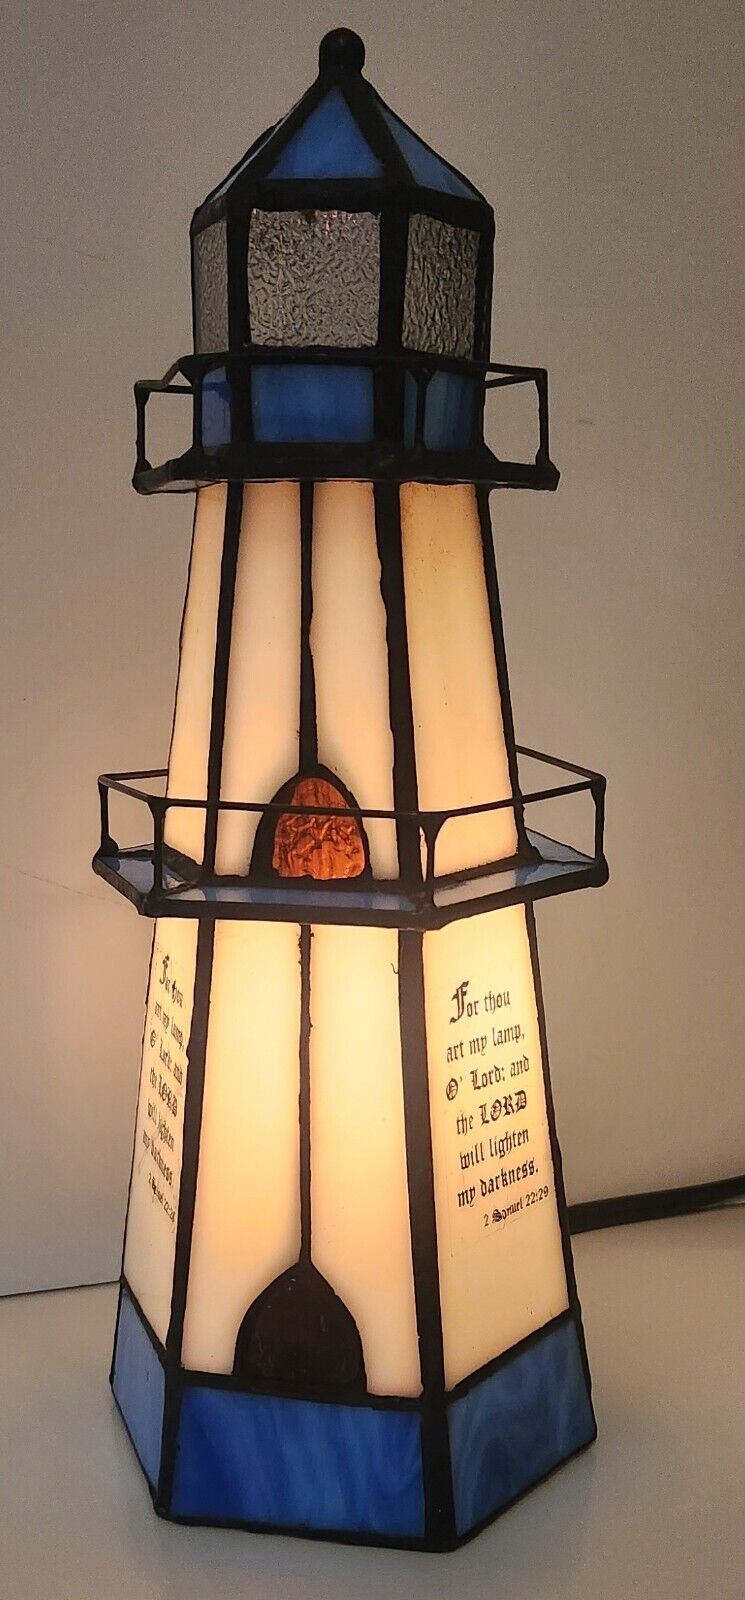 Vintage Stained Glass Lighthouse Lamp Night Light Blue & White Religious